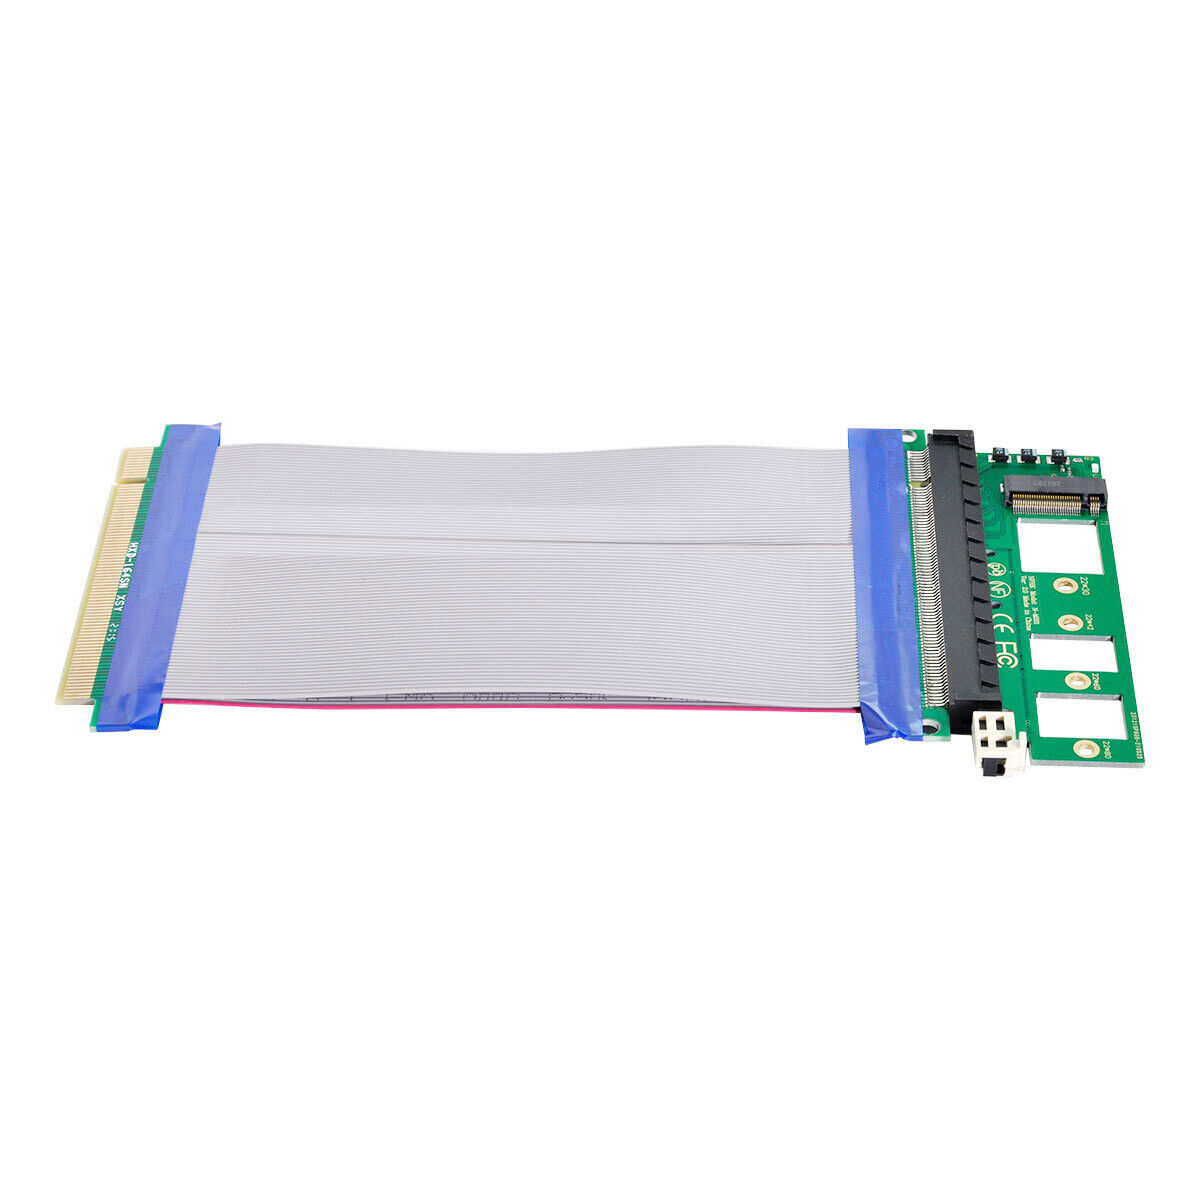 Cablecc NGFF M-key NVME AHCI SSD to PCI-E 3.0 16x Vertical Adapter with Cable